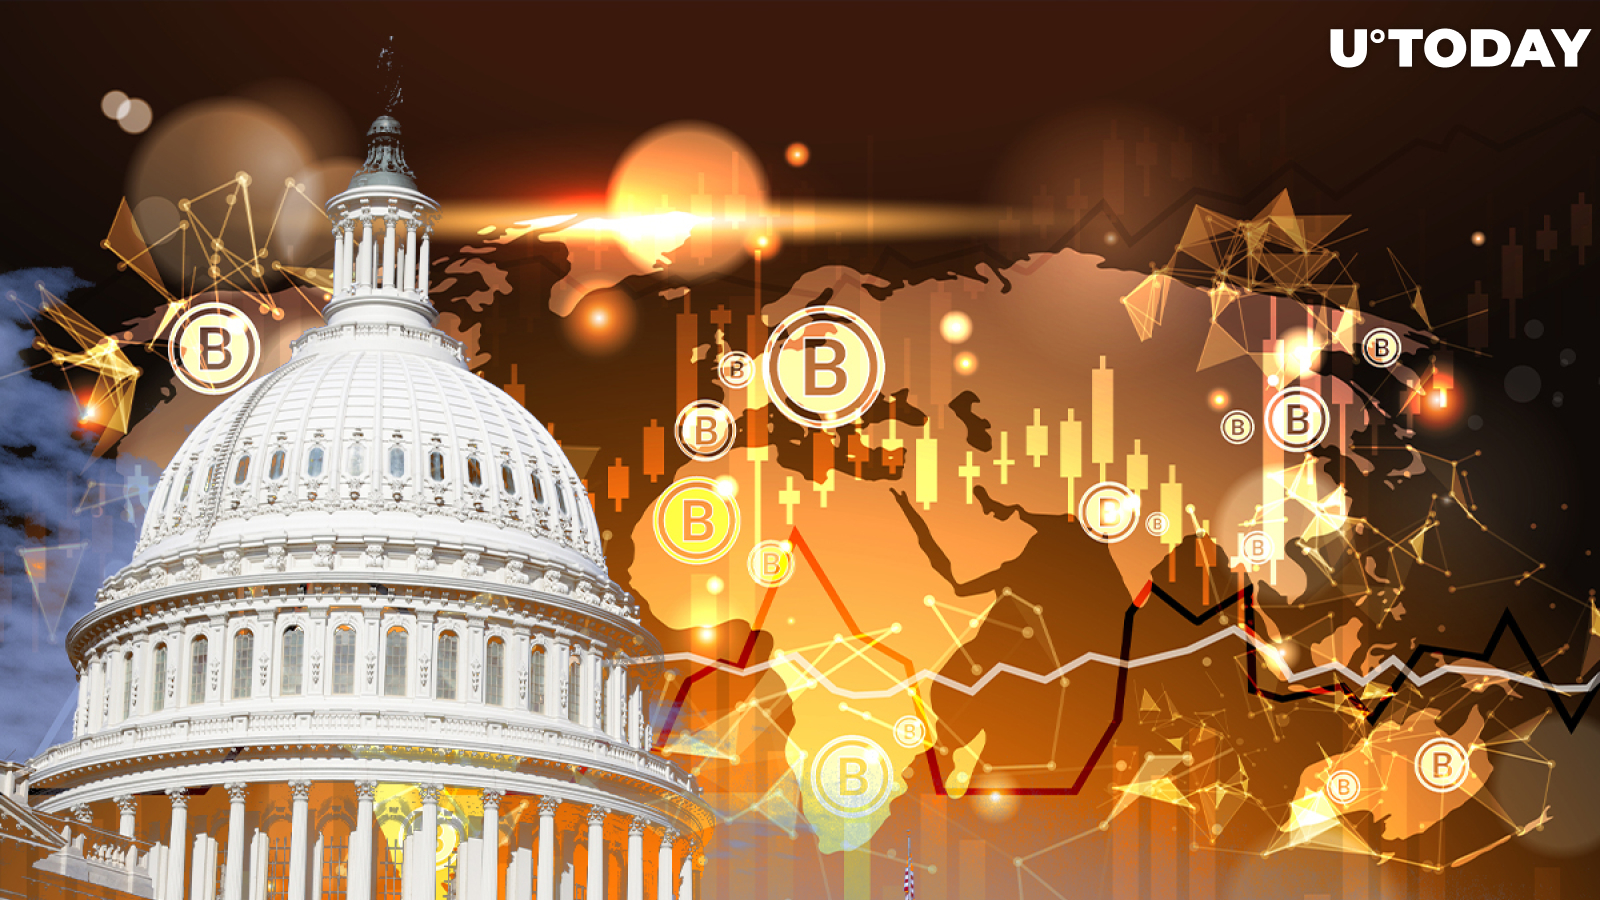 U.S. Senators Introduce Bill Aimed at Catching Up with Global Crypto Regulations